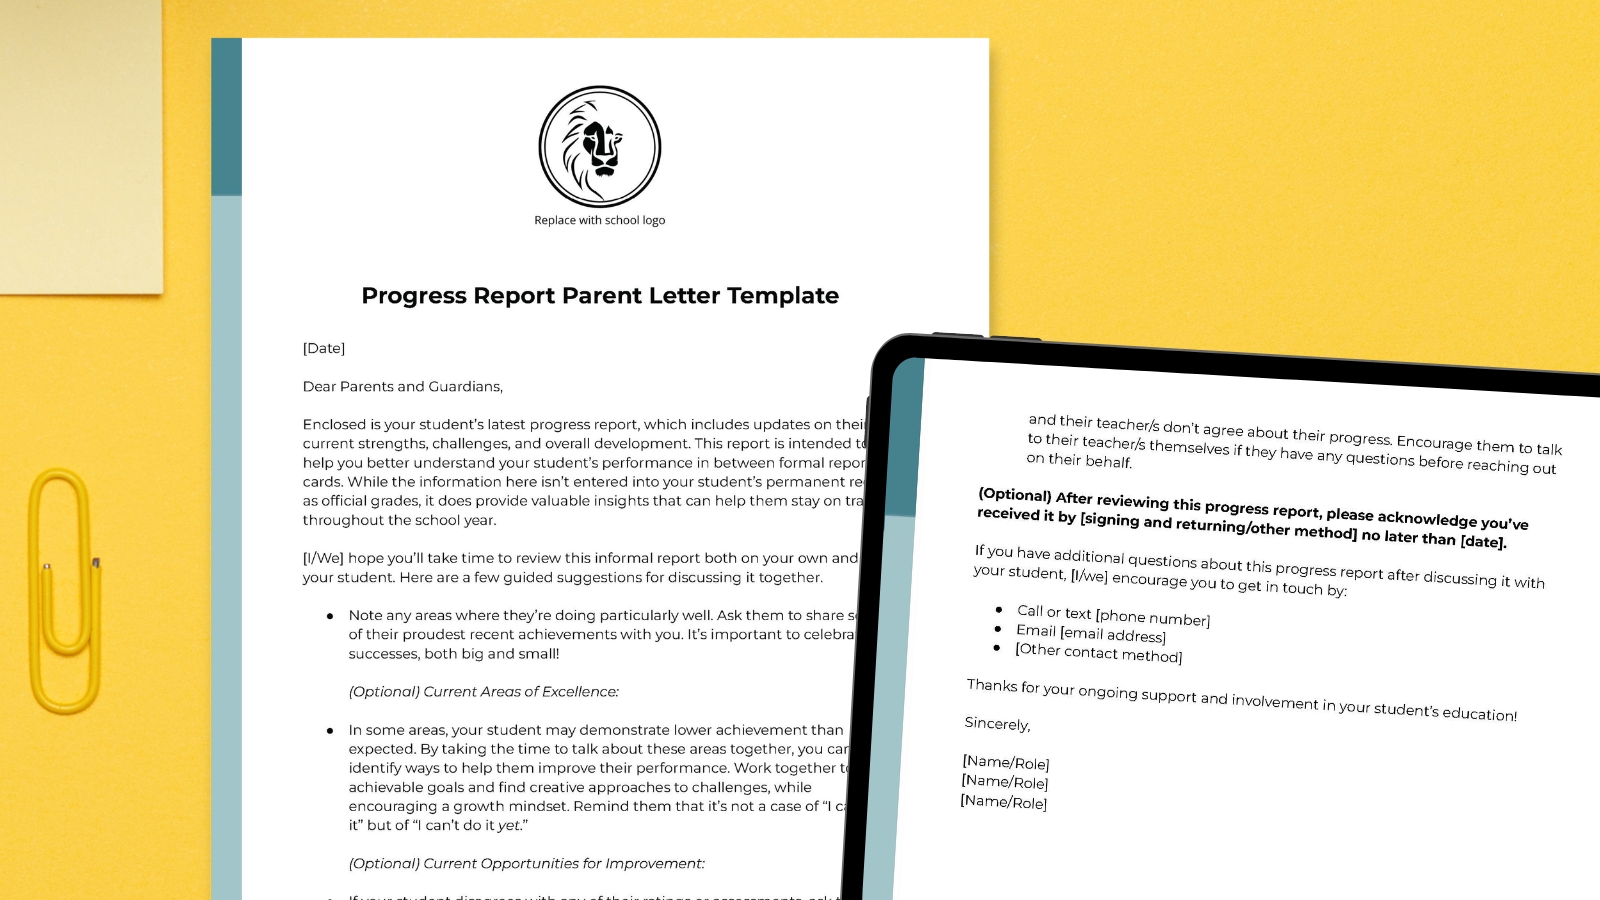 Student progress report letter to students shown on paper and tablet on desk.